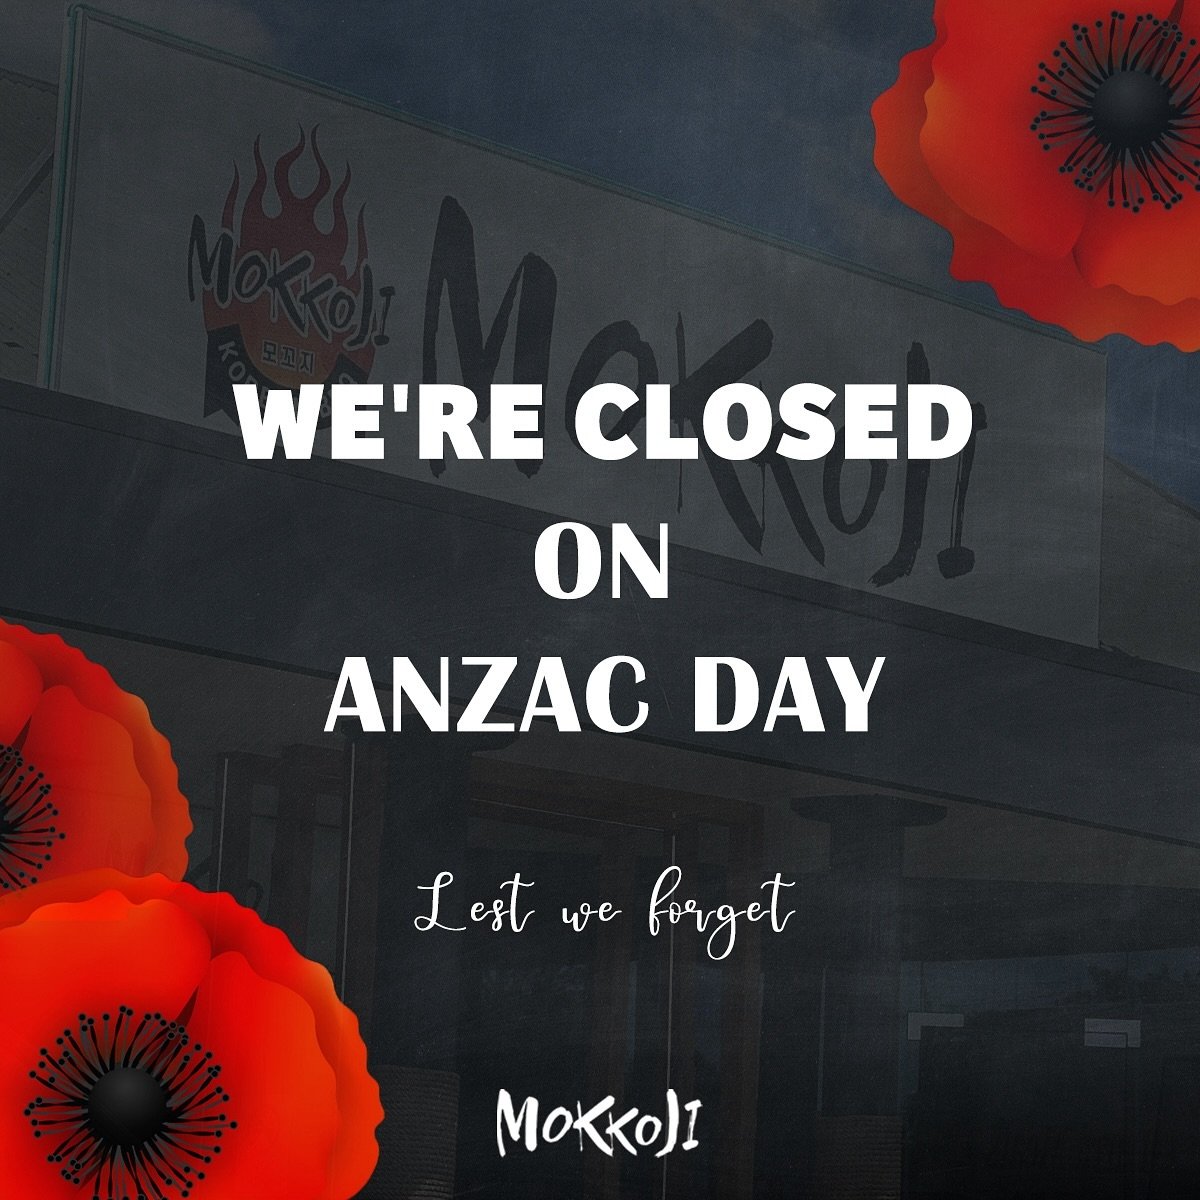 On ANZAC Day, April 25th,

our store will be closed to honor and remember the sacrifices made by our service men and women. We will reopen the following day with regular business hours. Thank you for your understanding.